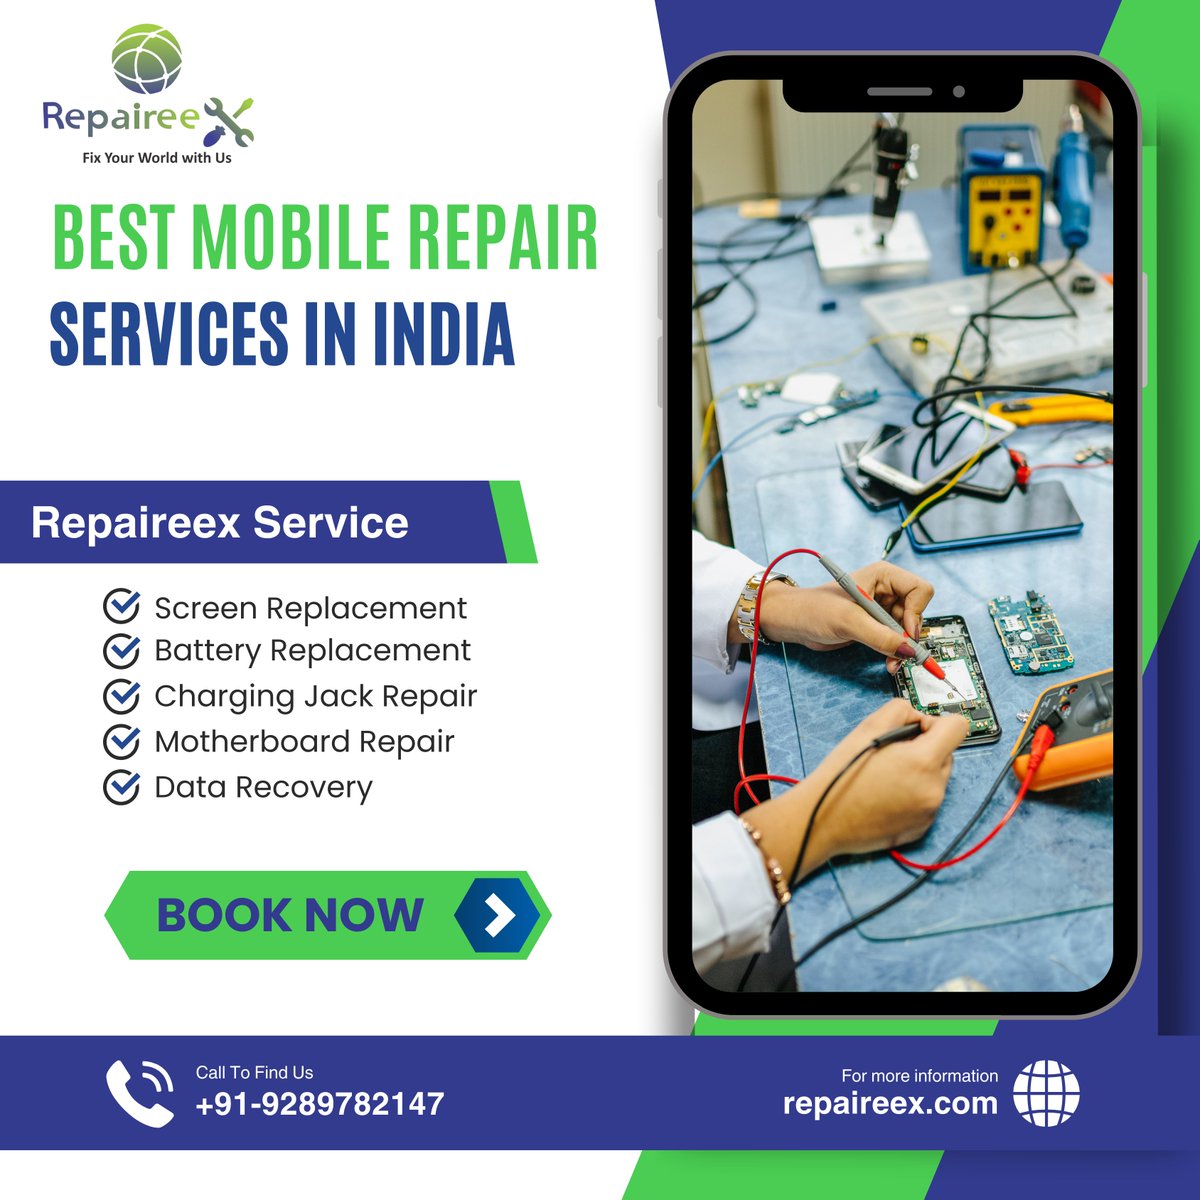 📱 Struggling with a cracked screen or a glitchy phone?  Our Best Mobile Repair Services in India got you covered! 💪  #MobileRepair #PhoneFix #IndiaServices 

Contact us at +91-9289782147 or visit repaireex.com for expert repairs that won't break the bank